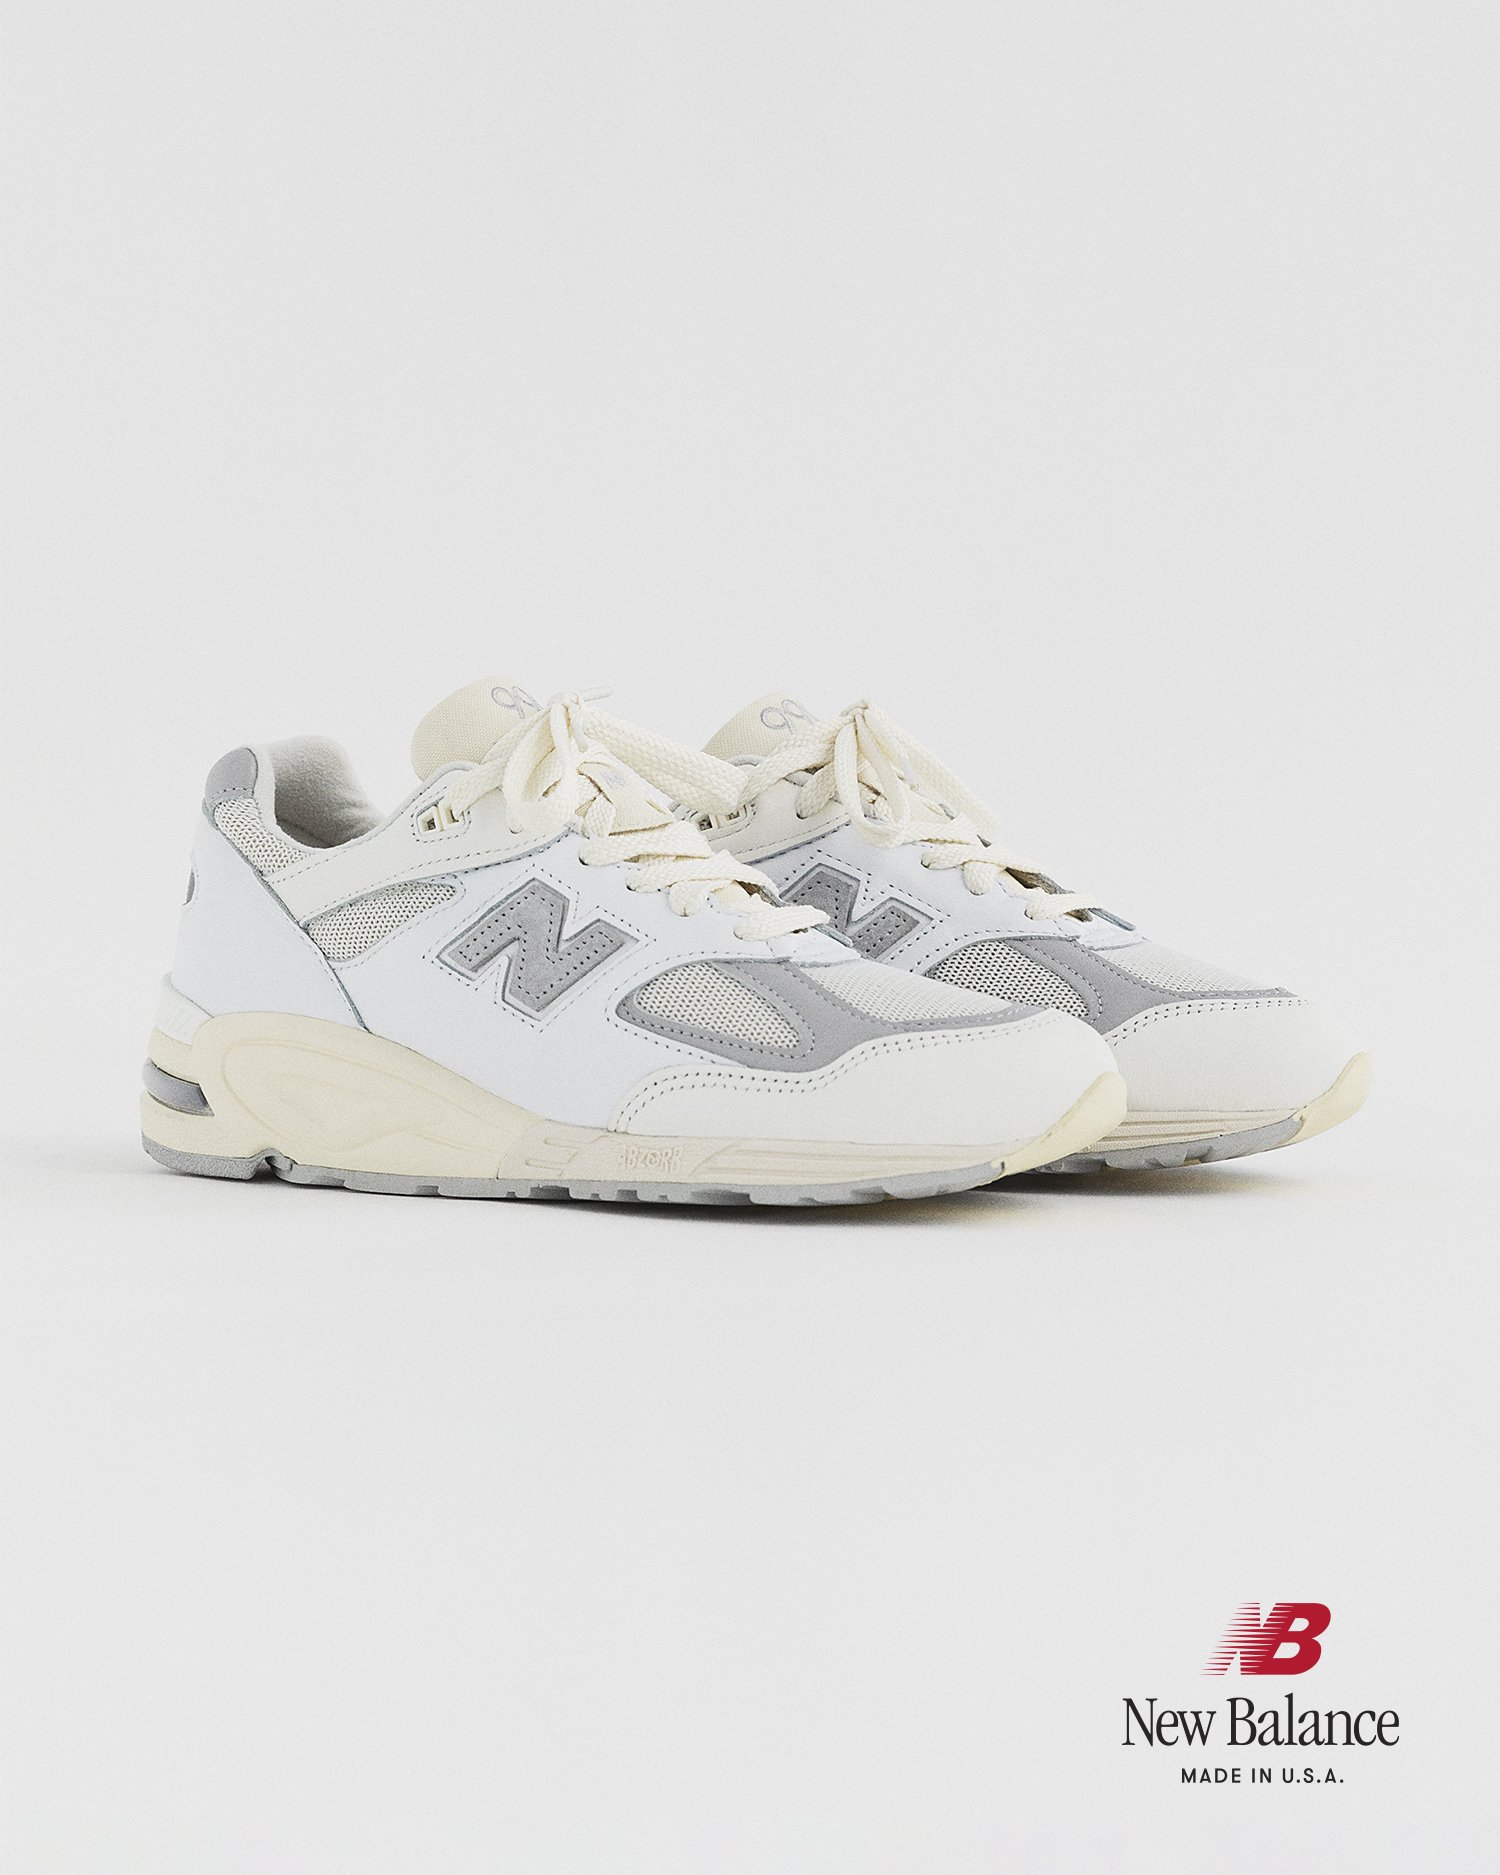 The Aimé Leon Dore x New Balance supremacy continues with brand new 860v2